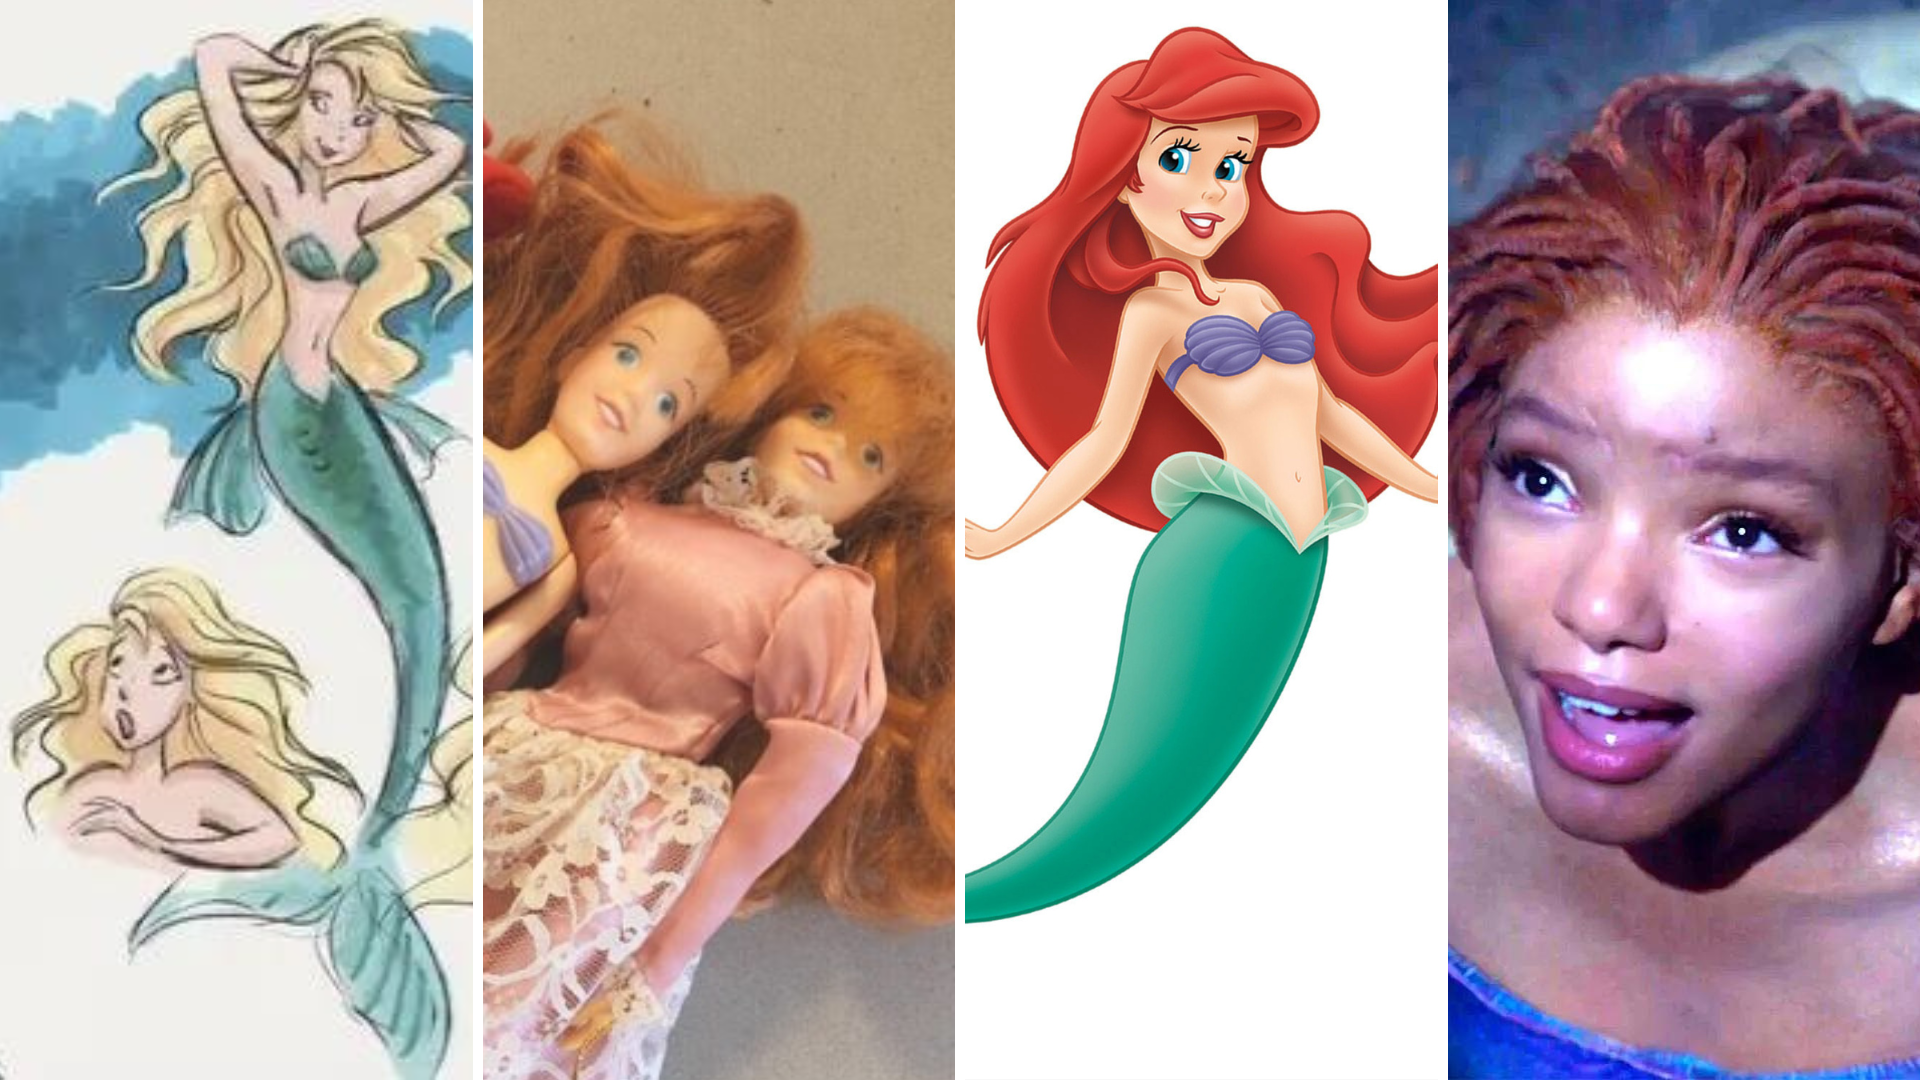 The History Behind Ariel’s Red Hair from Disney’s “The Little Mermaid”